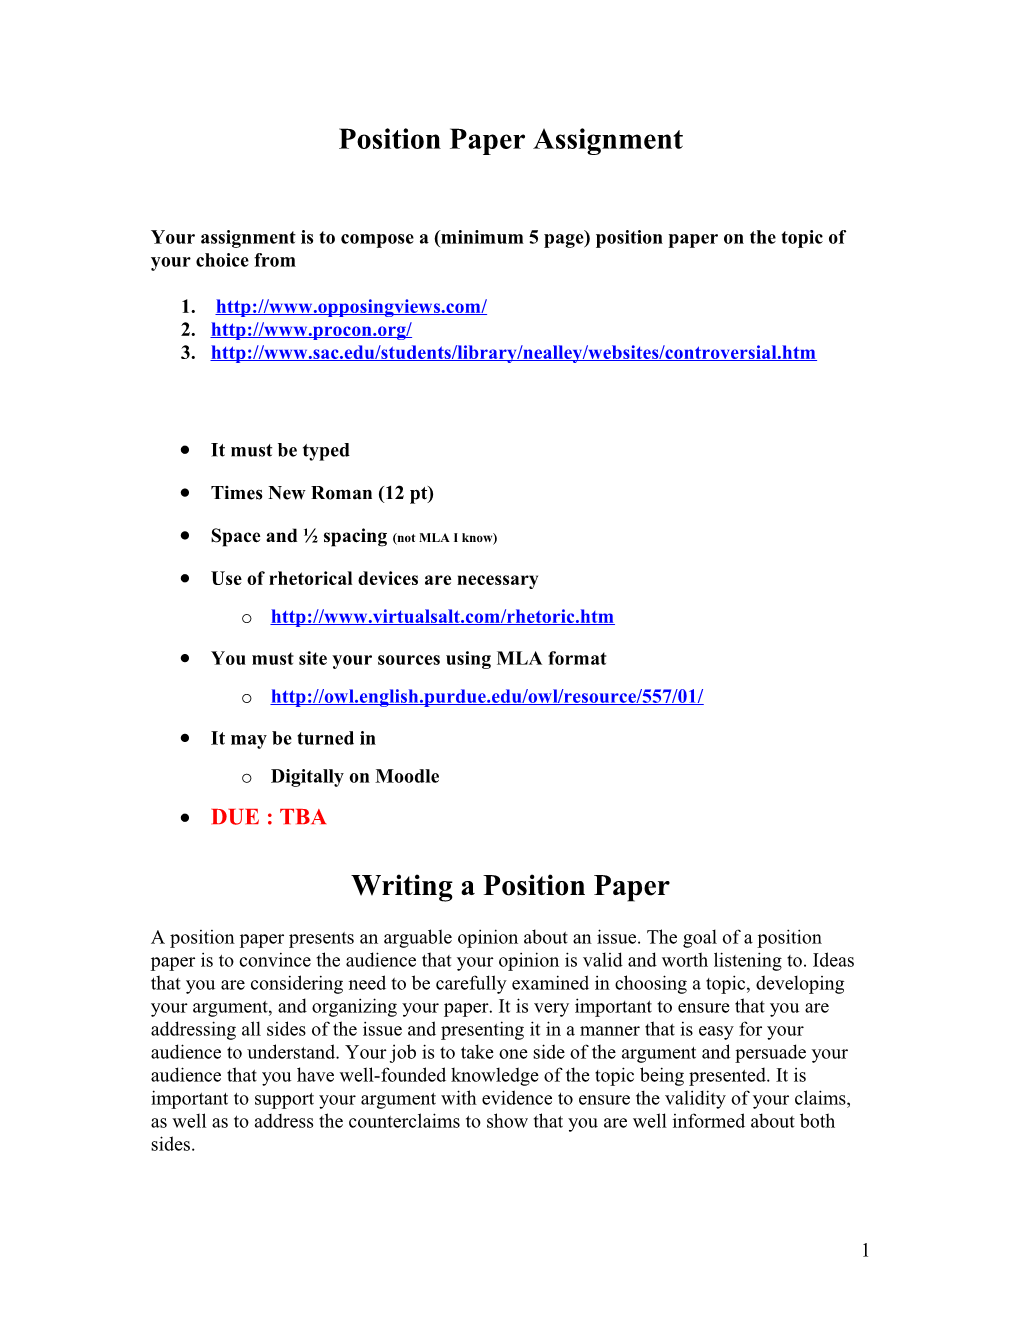 Writing a Position Paper